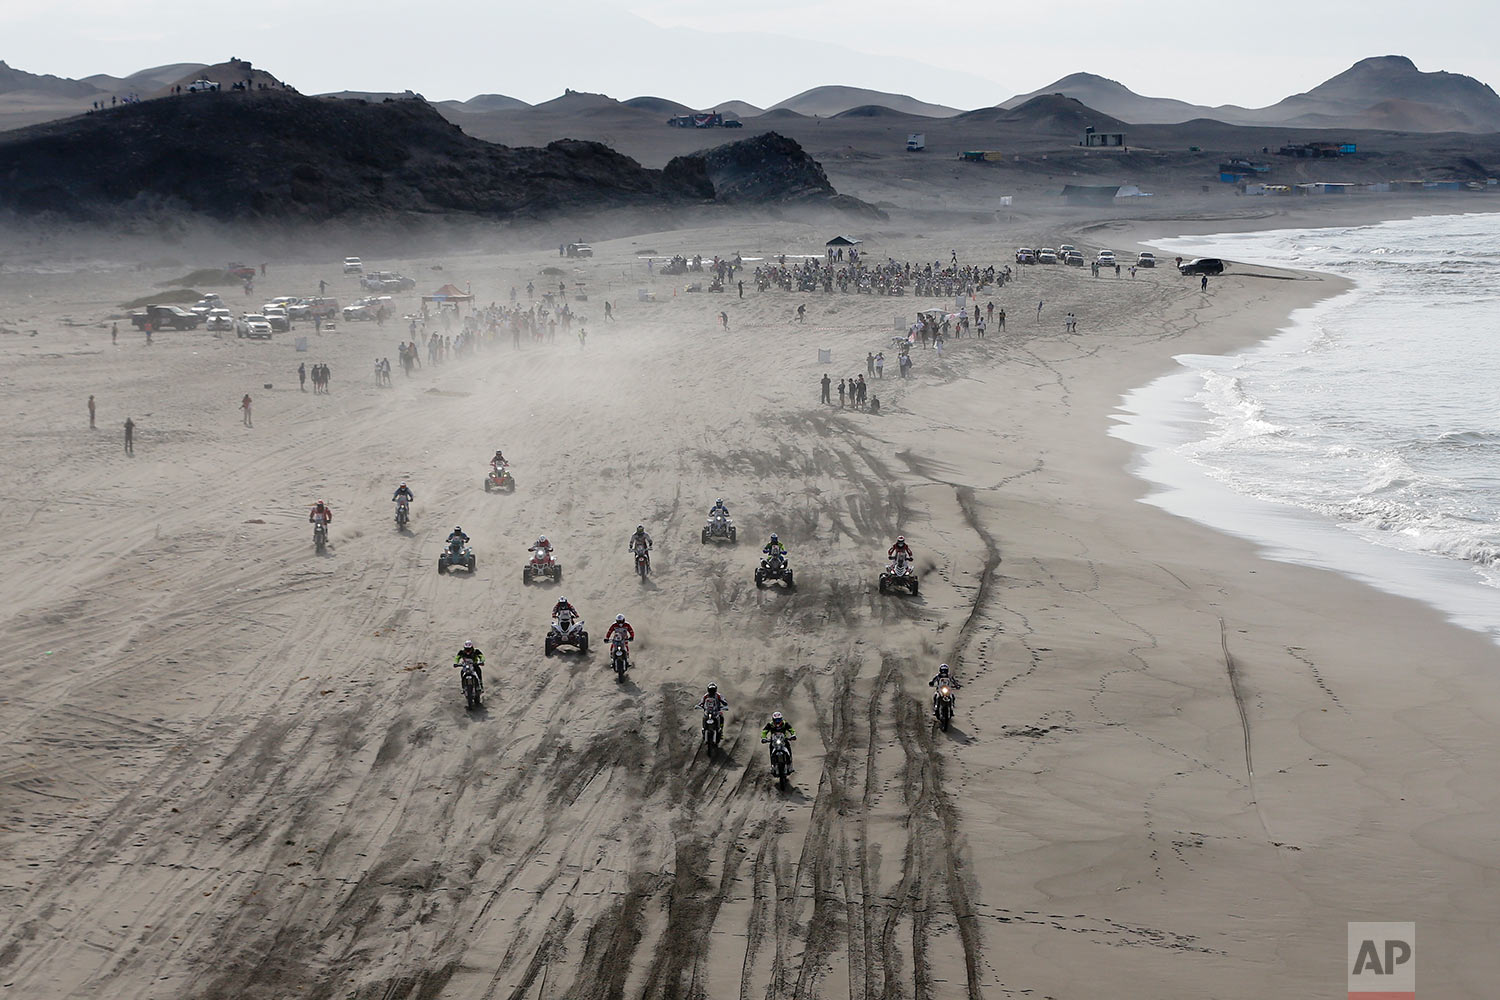  In this Tuesday, Jan. 9, 2018 photo, motorbikes and quads leave tracks along the beach during the 4th stage of the Dakar Rally in San Juan de Marcona, Peru. (AP Photo/Ricardo Mazalan)|&nbsp; See these photos on AP Images  